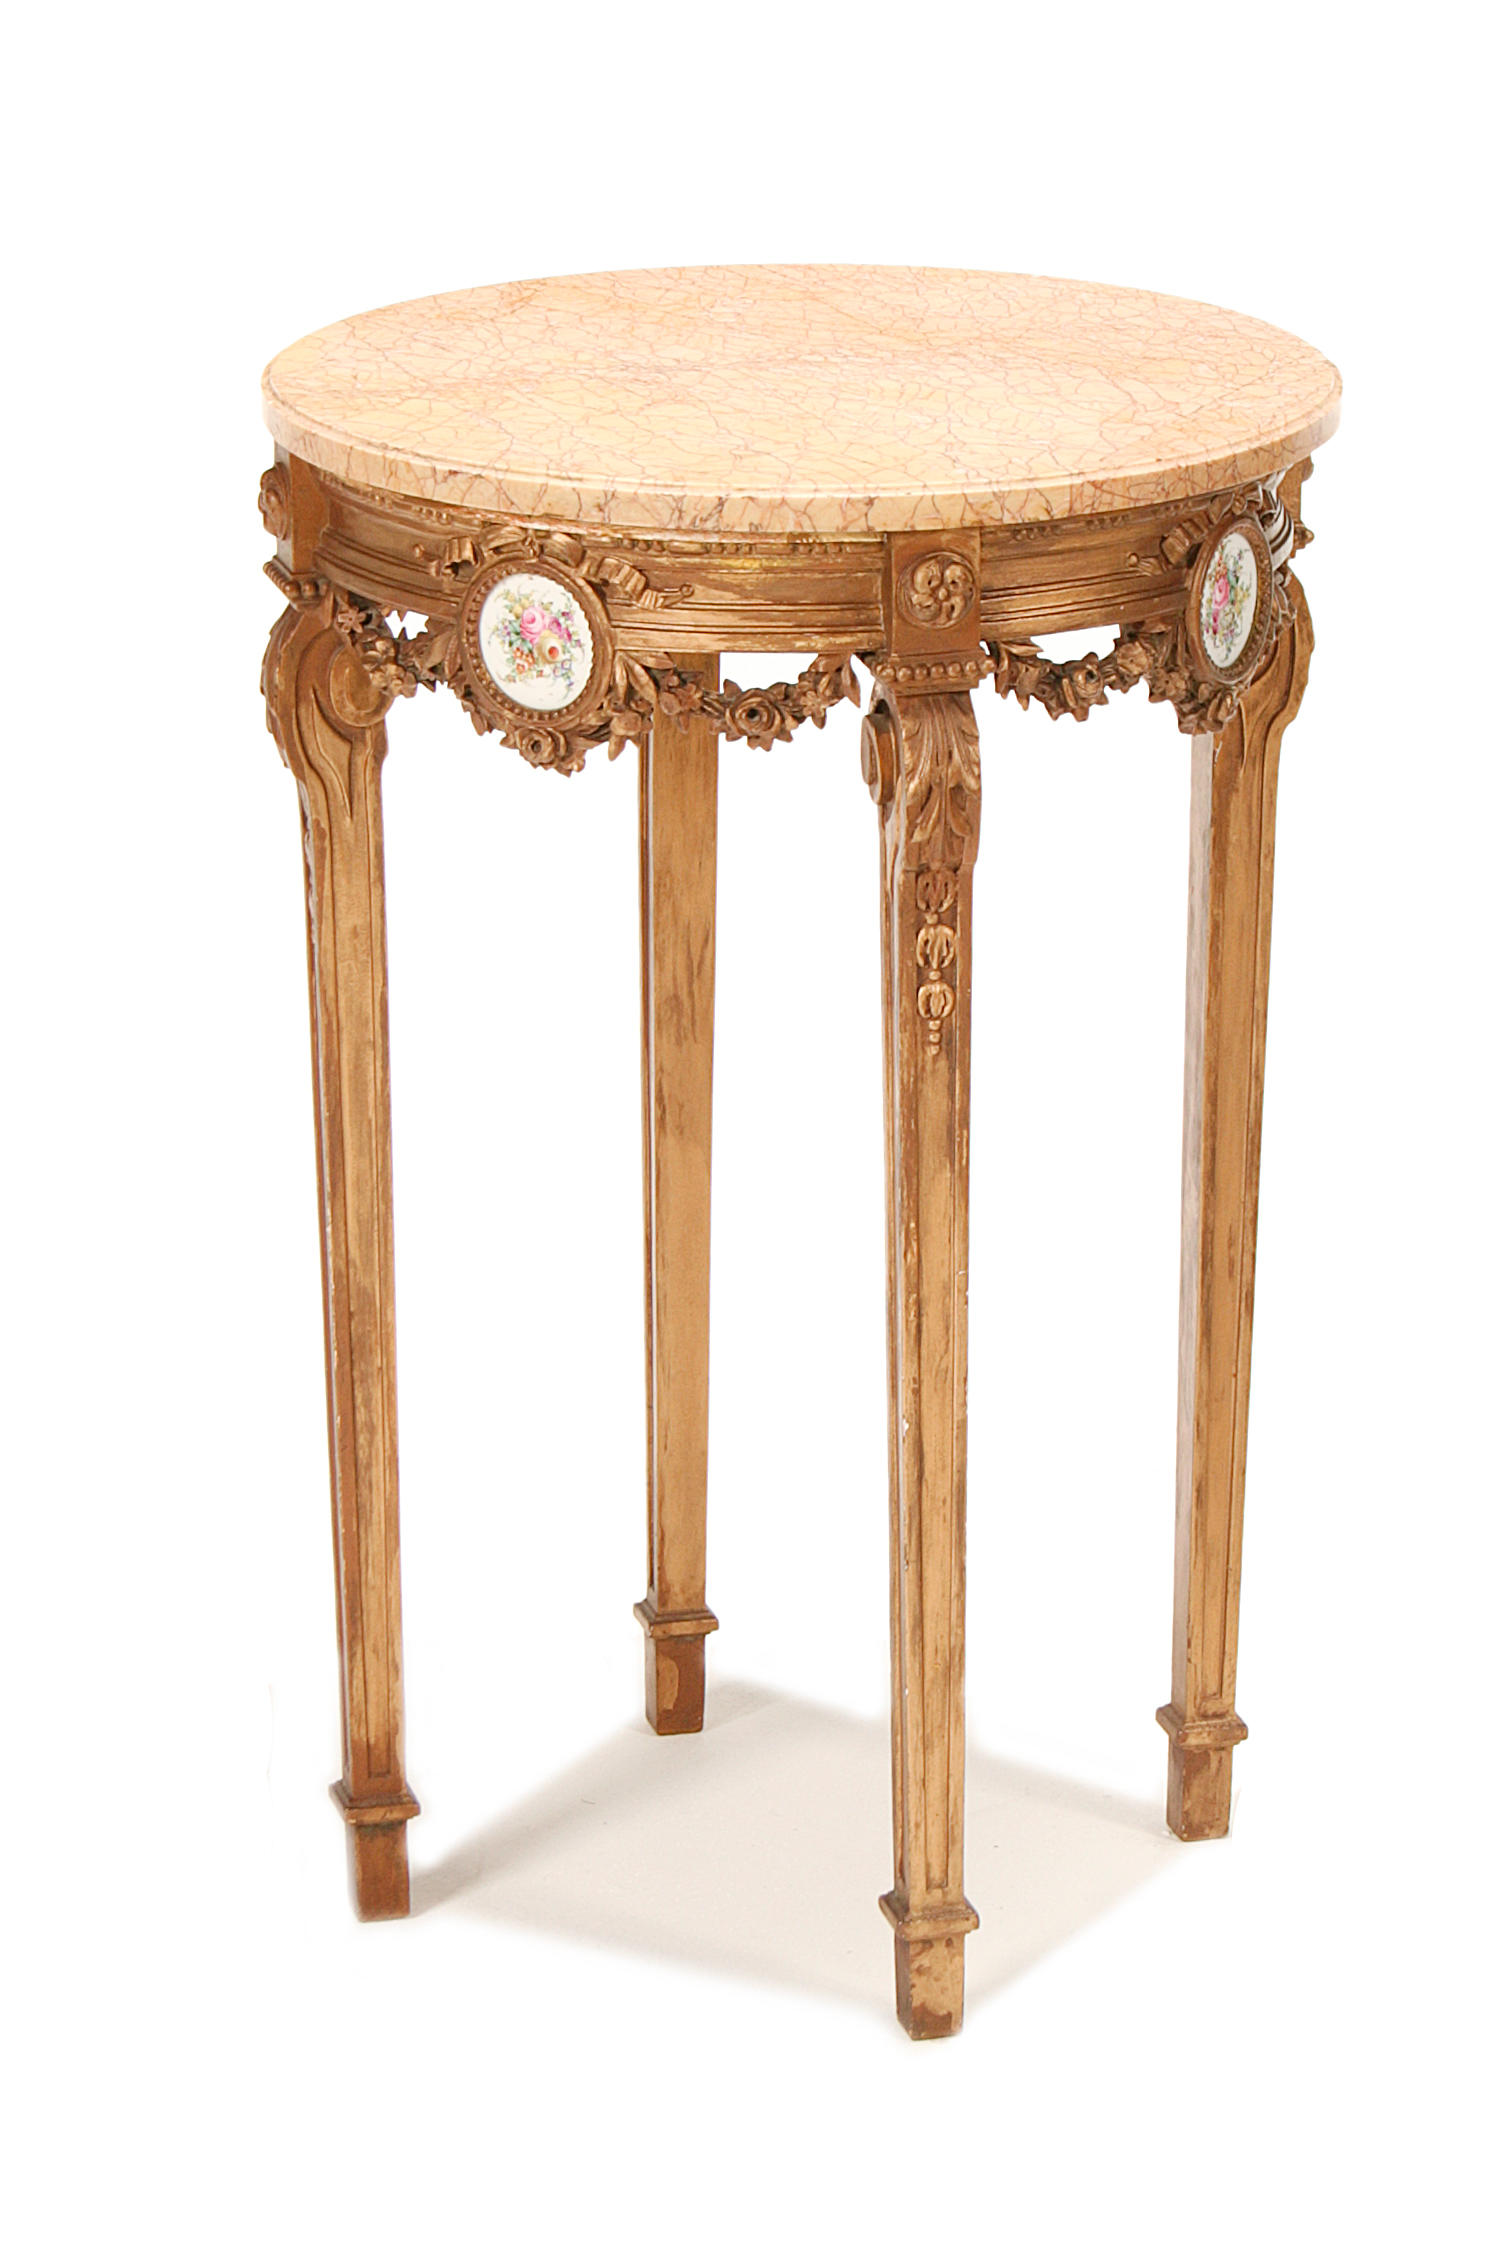 A French early 20th century giltwood and porcelain mounted occasional table